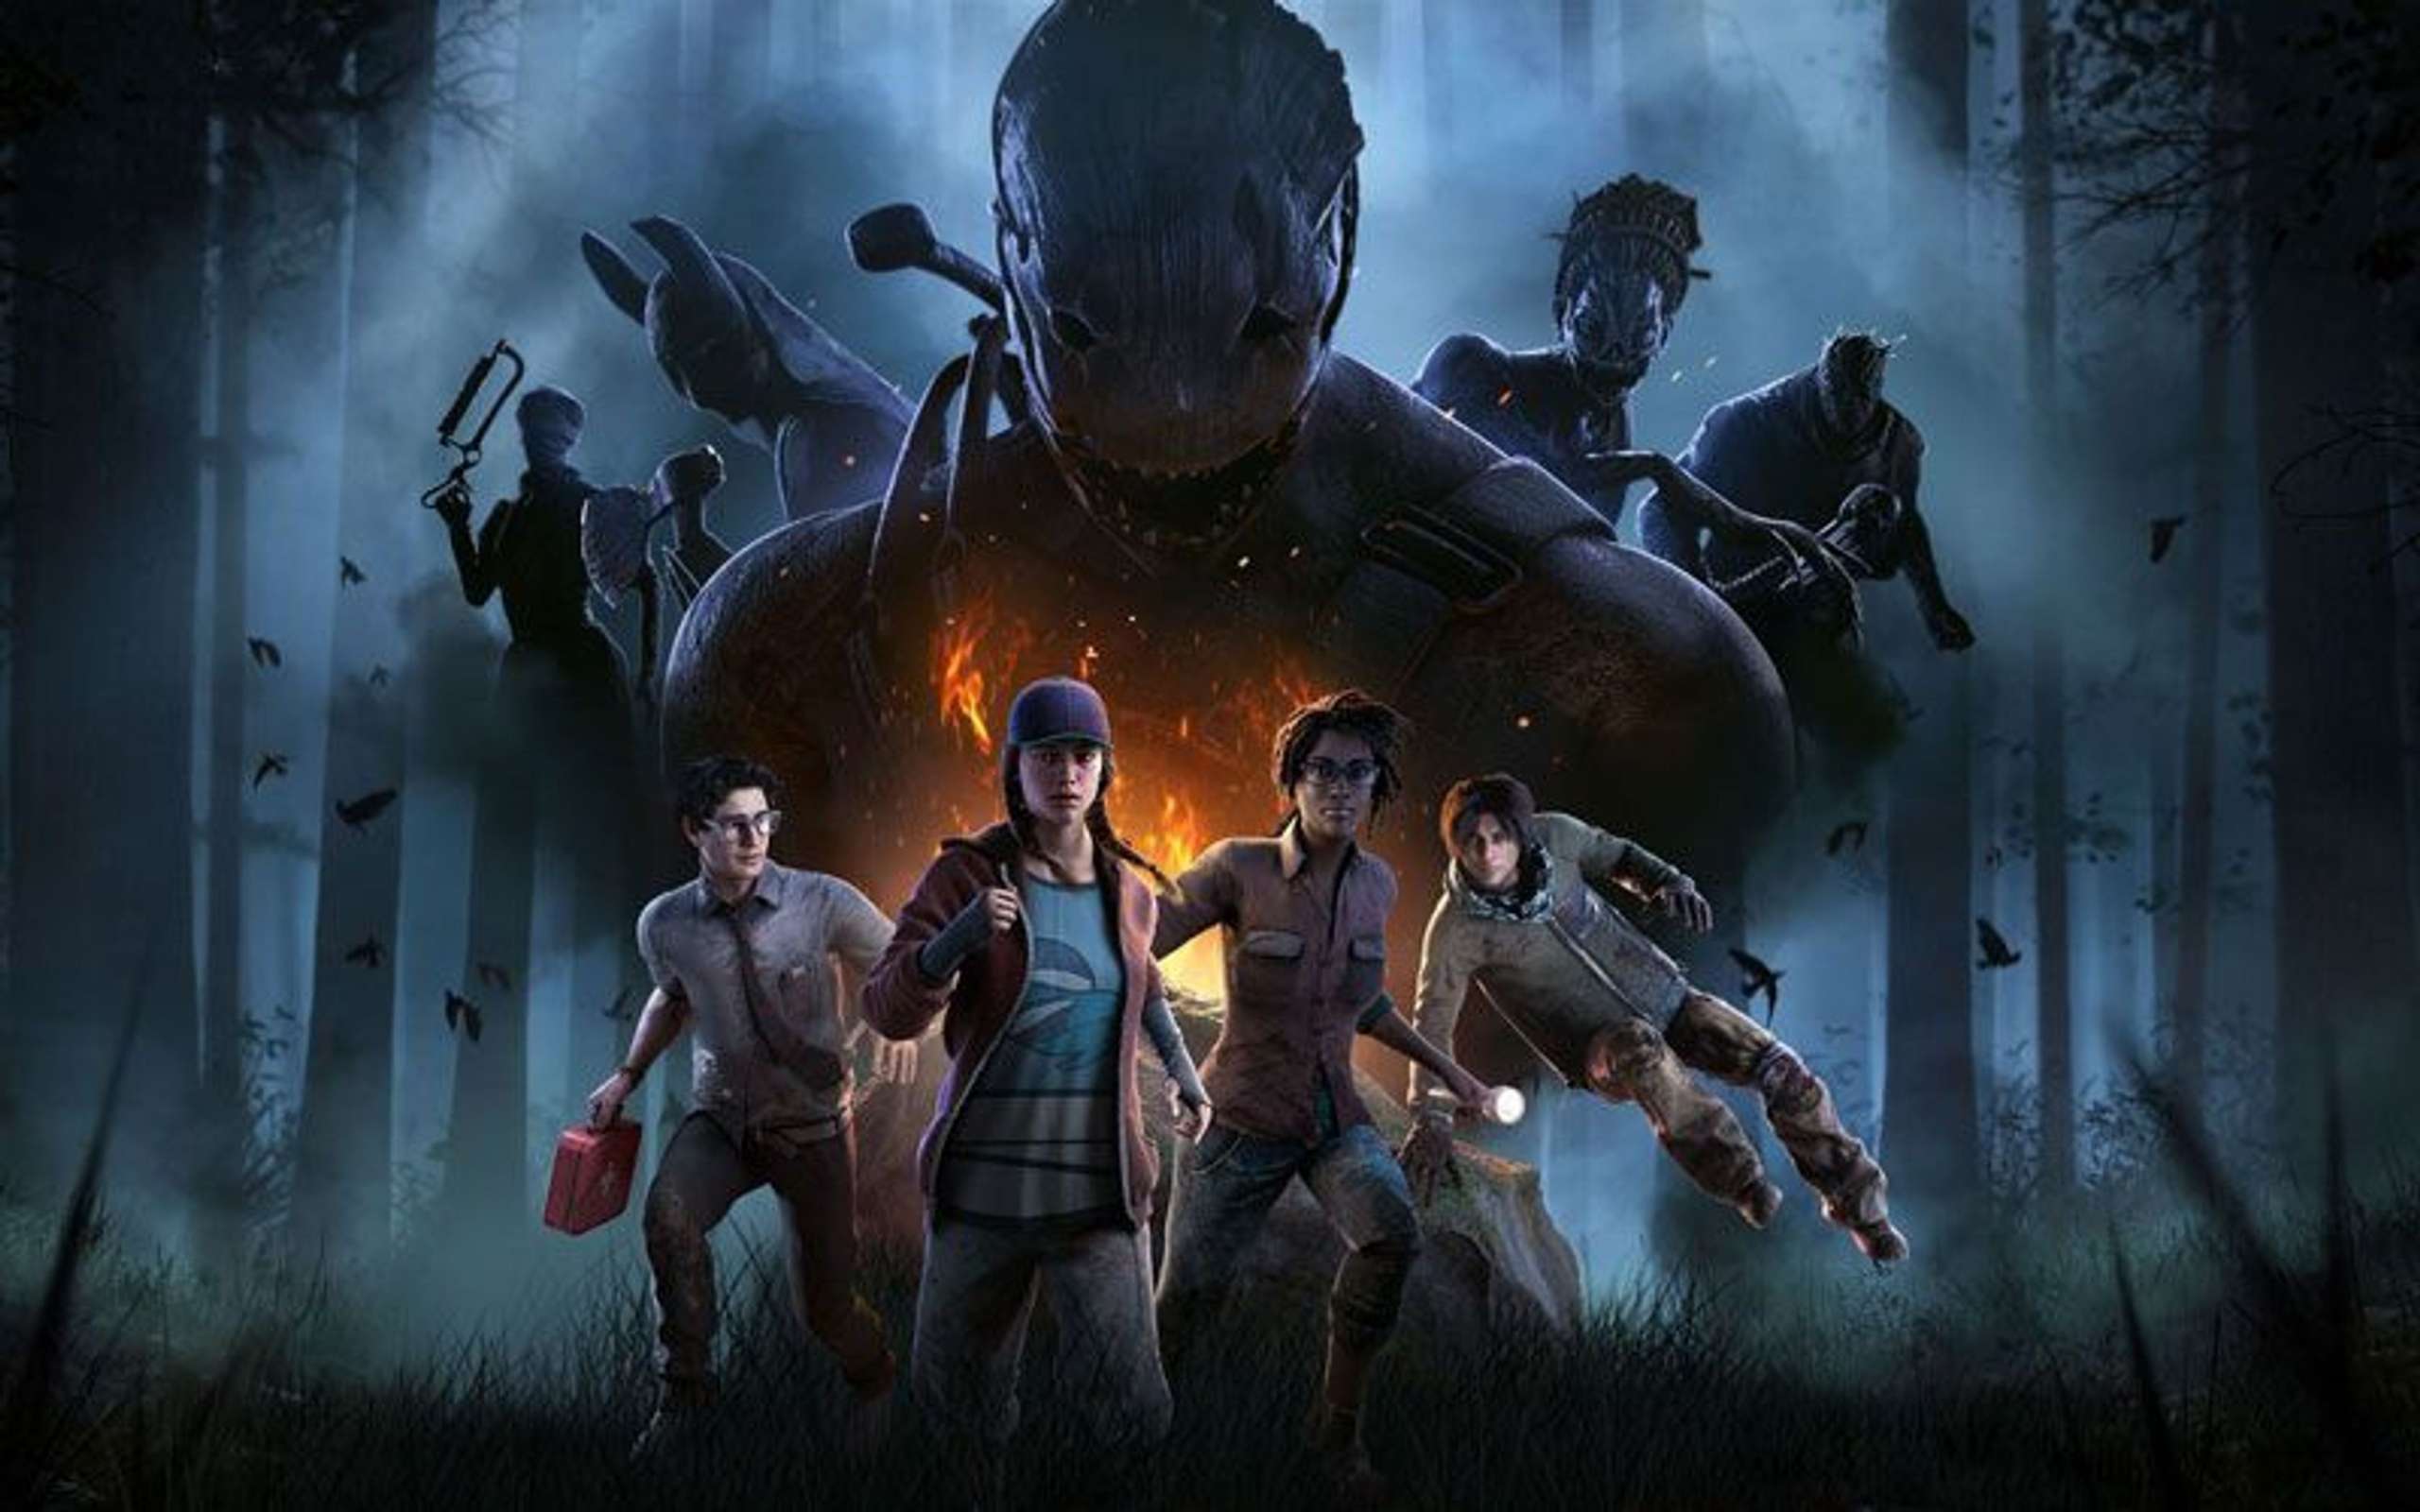 The Wiggle Escape System From Dead By Daylight Has Been Postponed By Behaviour Interactive And Will Be Release At A Future Date